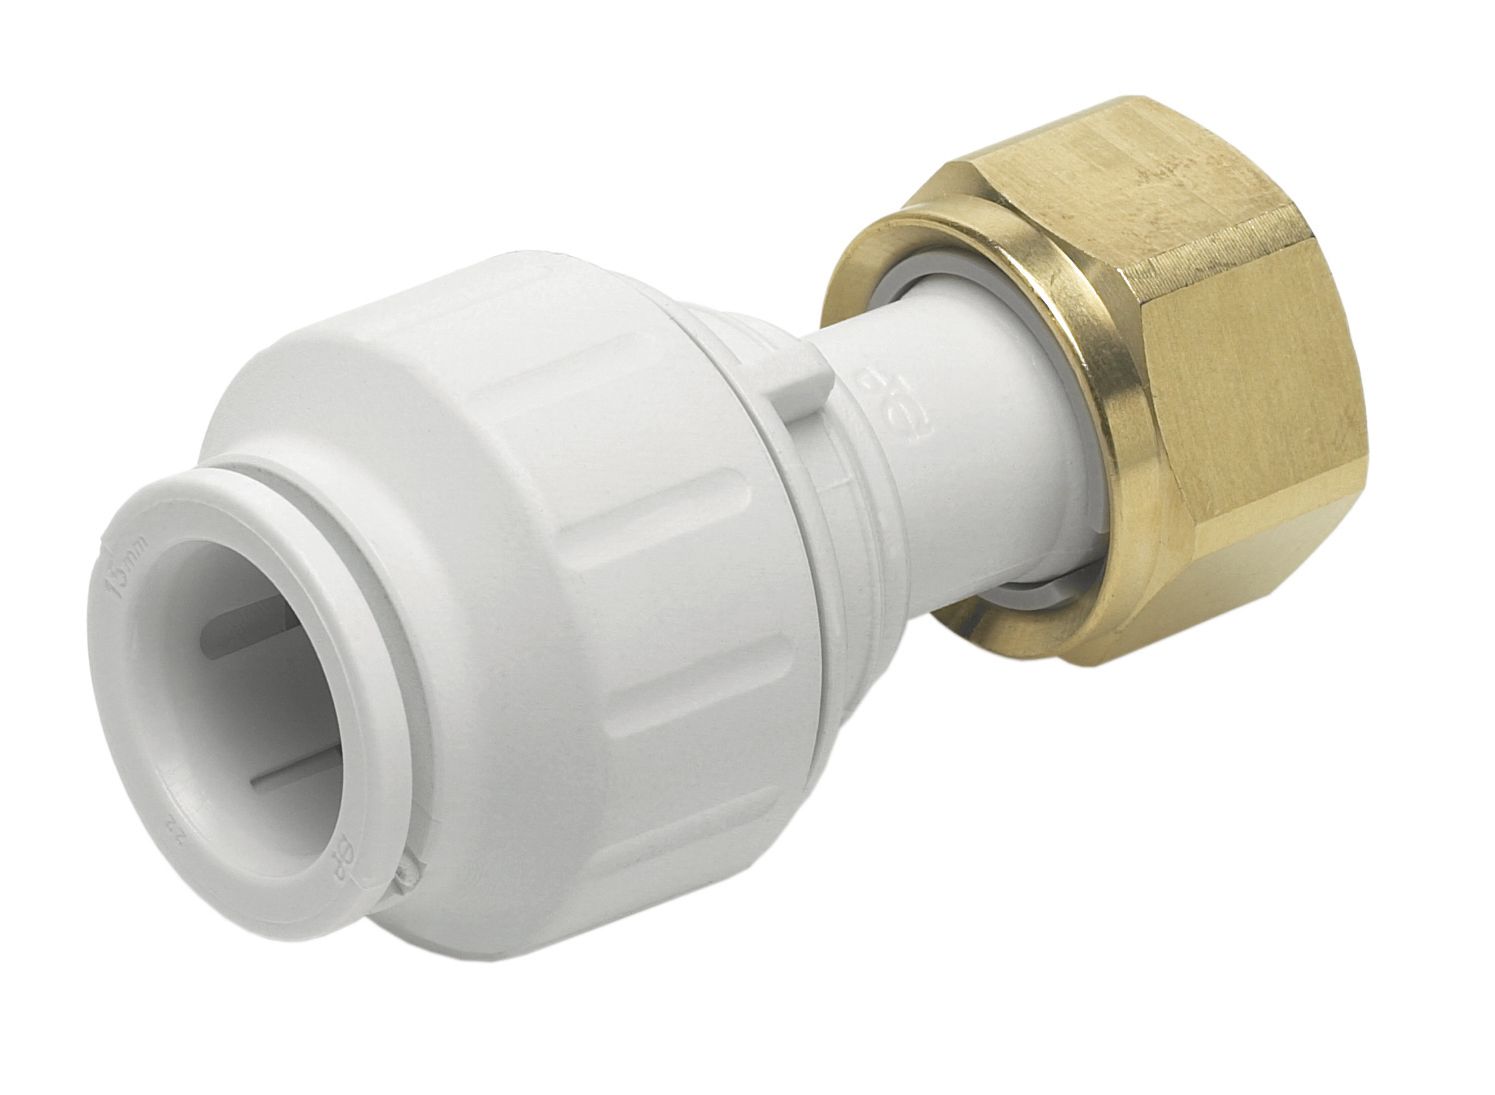 Image of John Guest Speedfit PEMSTC1014P Straight Tap Connector - 10mm x 1/2in